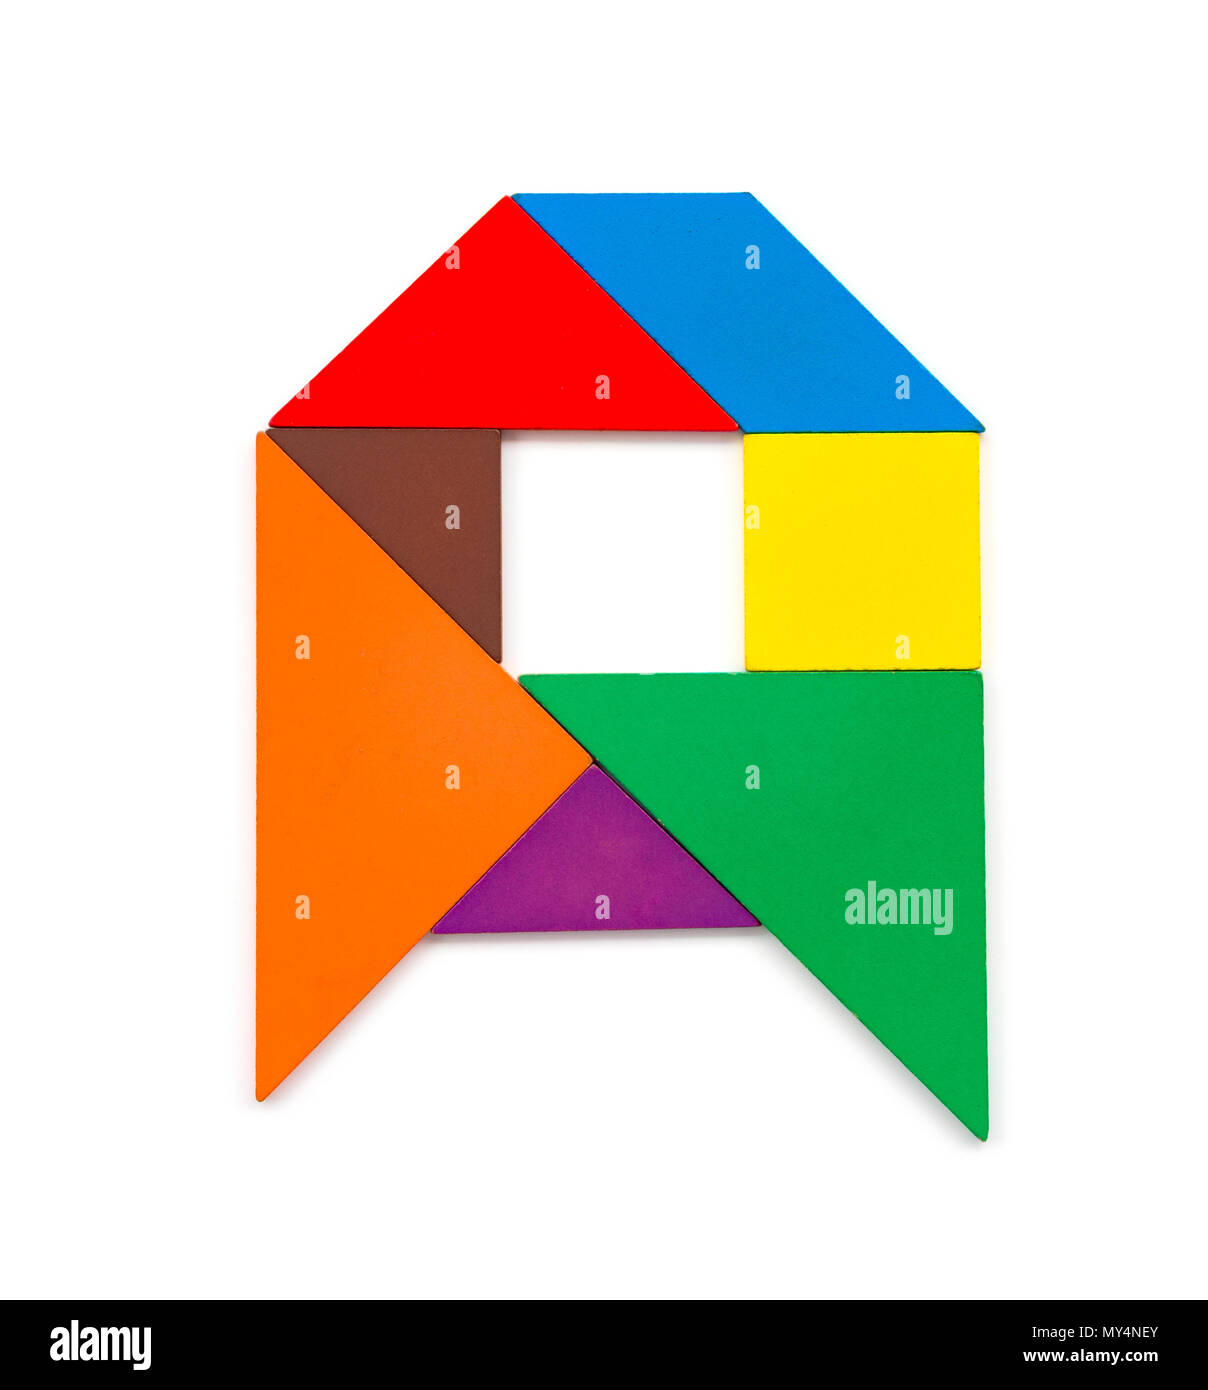 tangram shaped like a letter A on white background Stock Photo